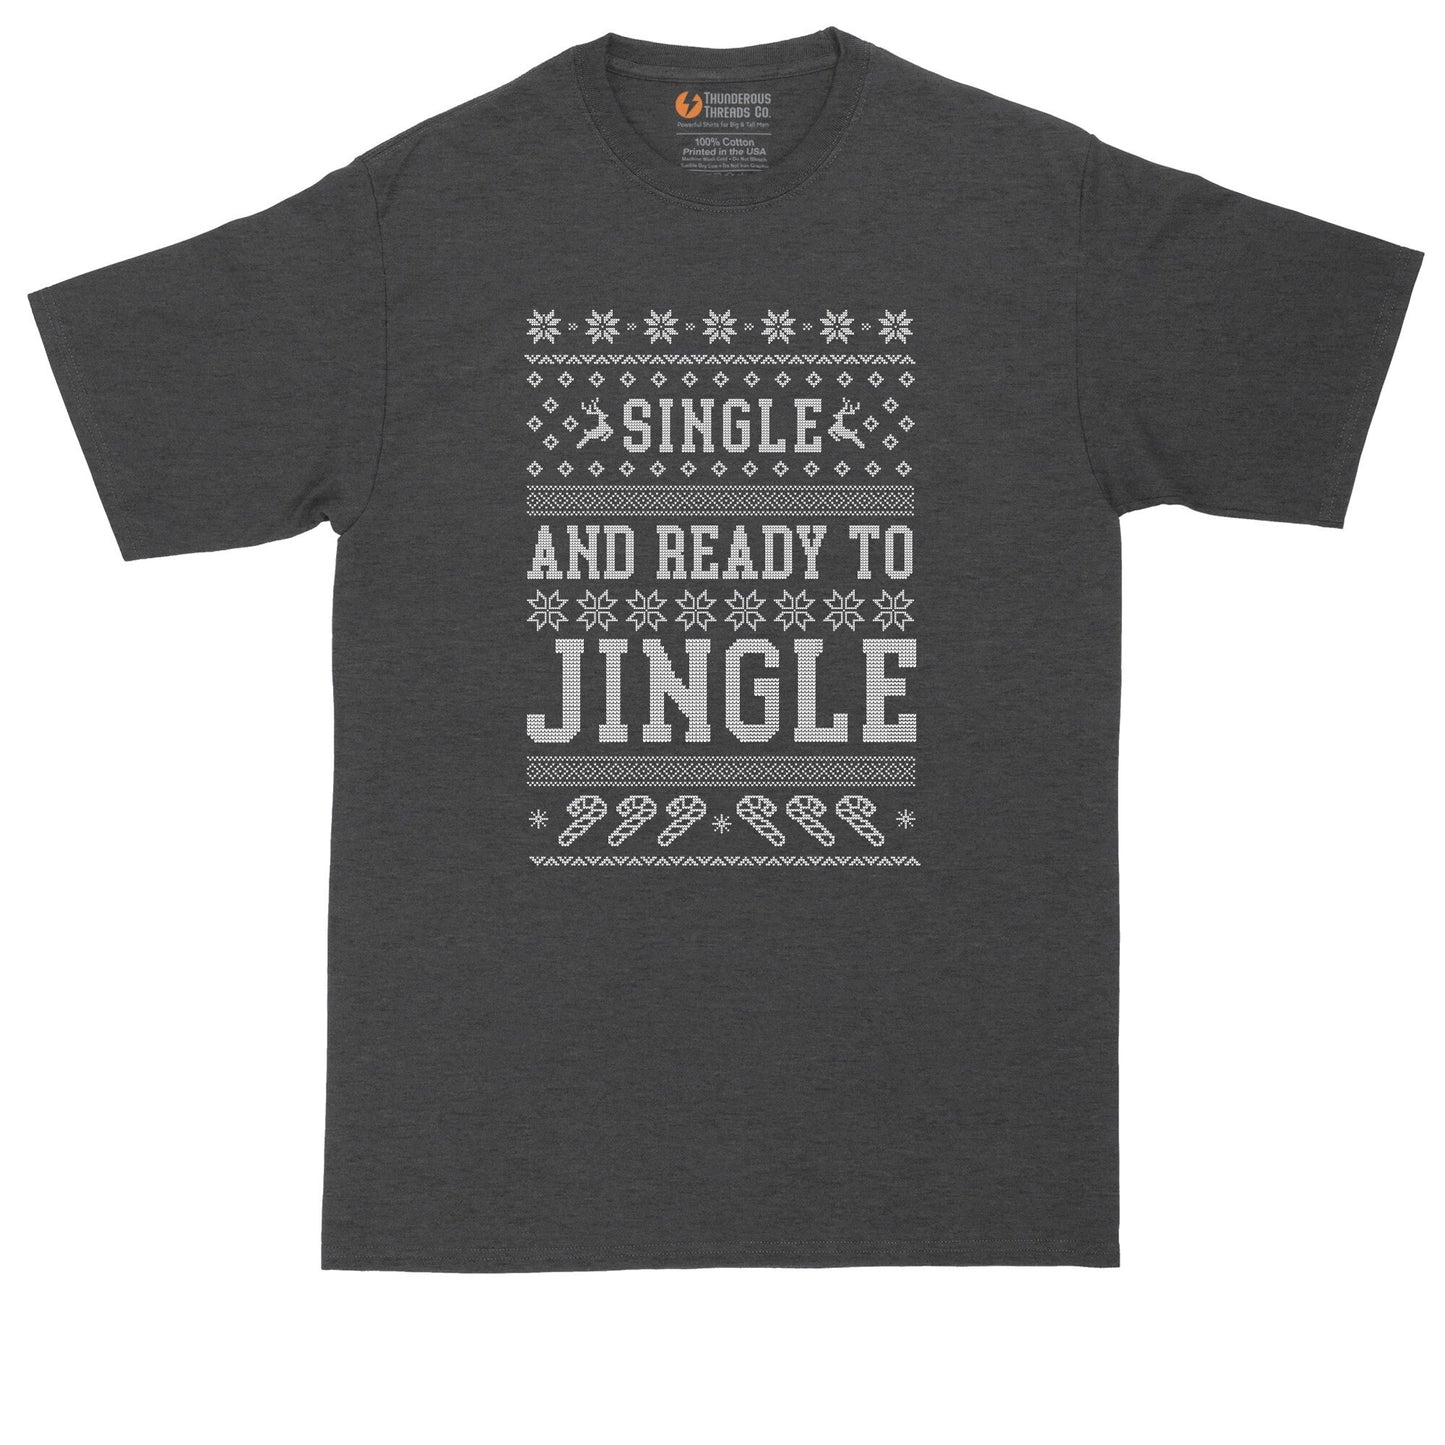 Single and Ready to Jingle | Big and Tall Mens T-Shirt | Funny T-Shirt | Graphic T-Shirt